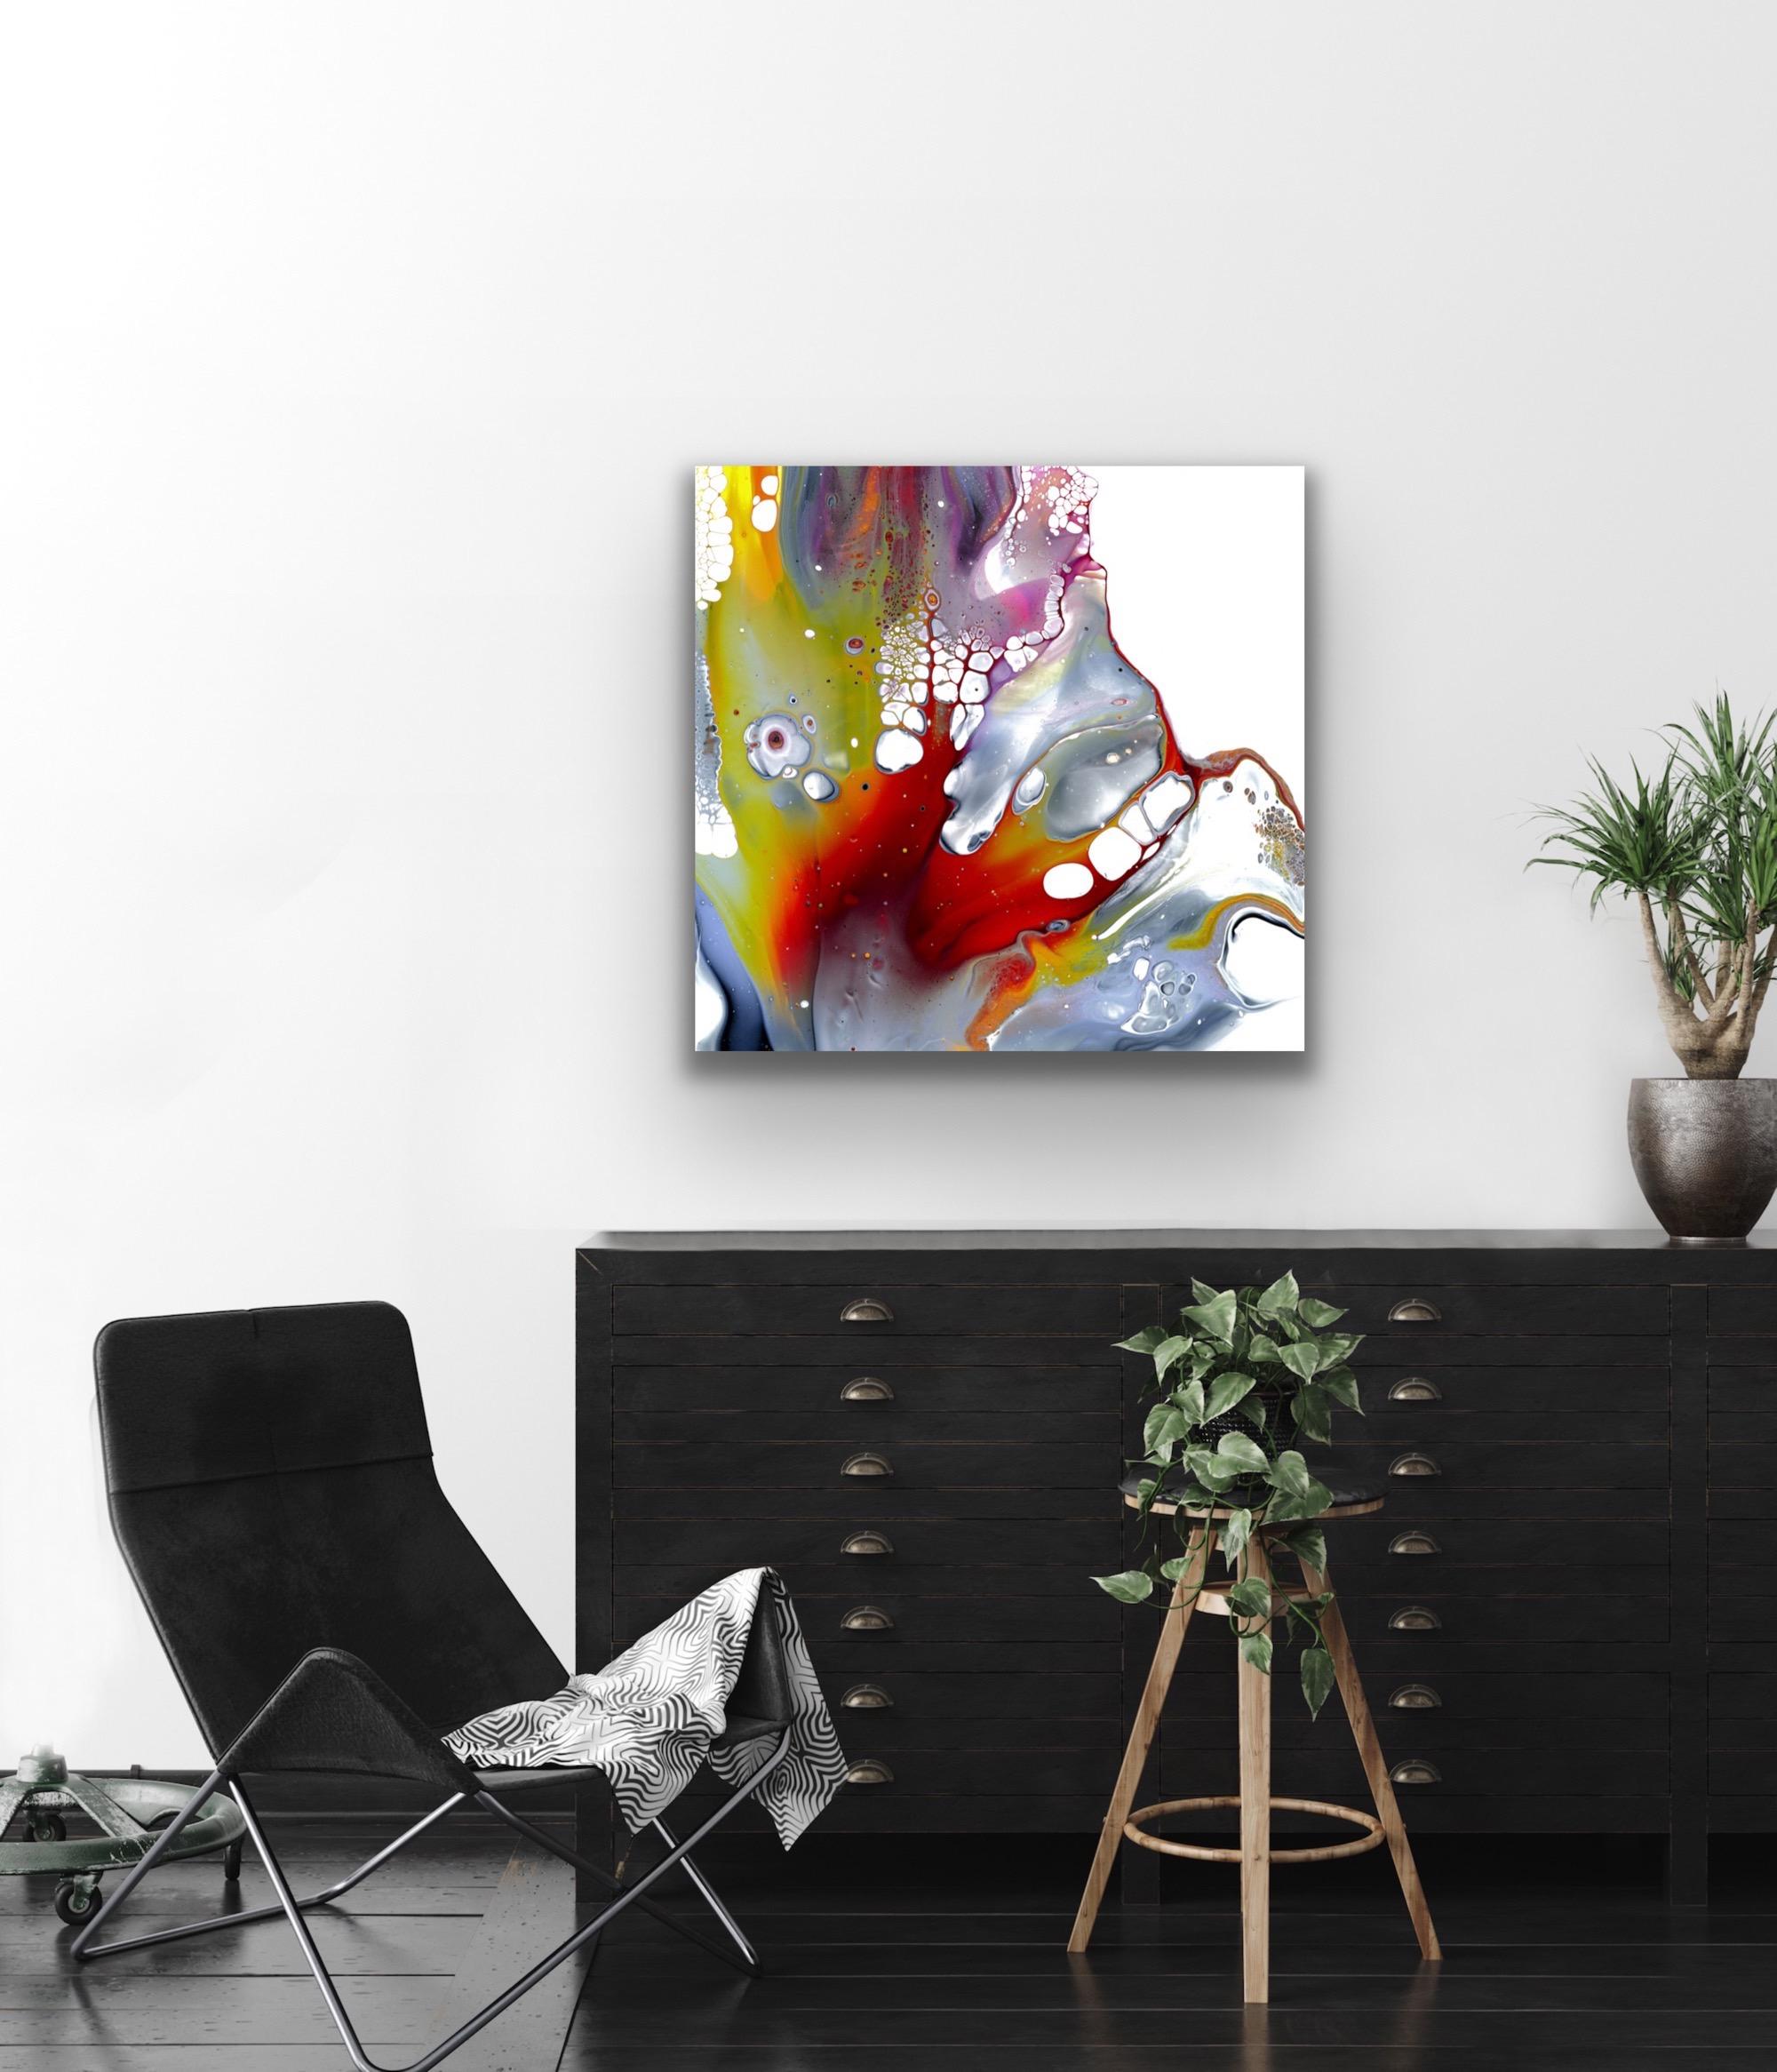 Contemporary Modern Abstract, Giclee Print on Metal, Limited Edition, by Cessy  For Sale 2